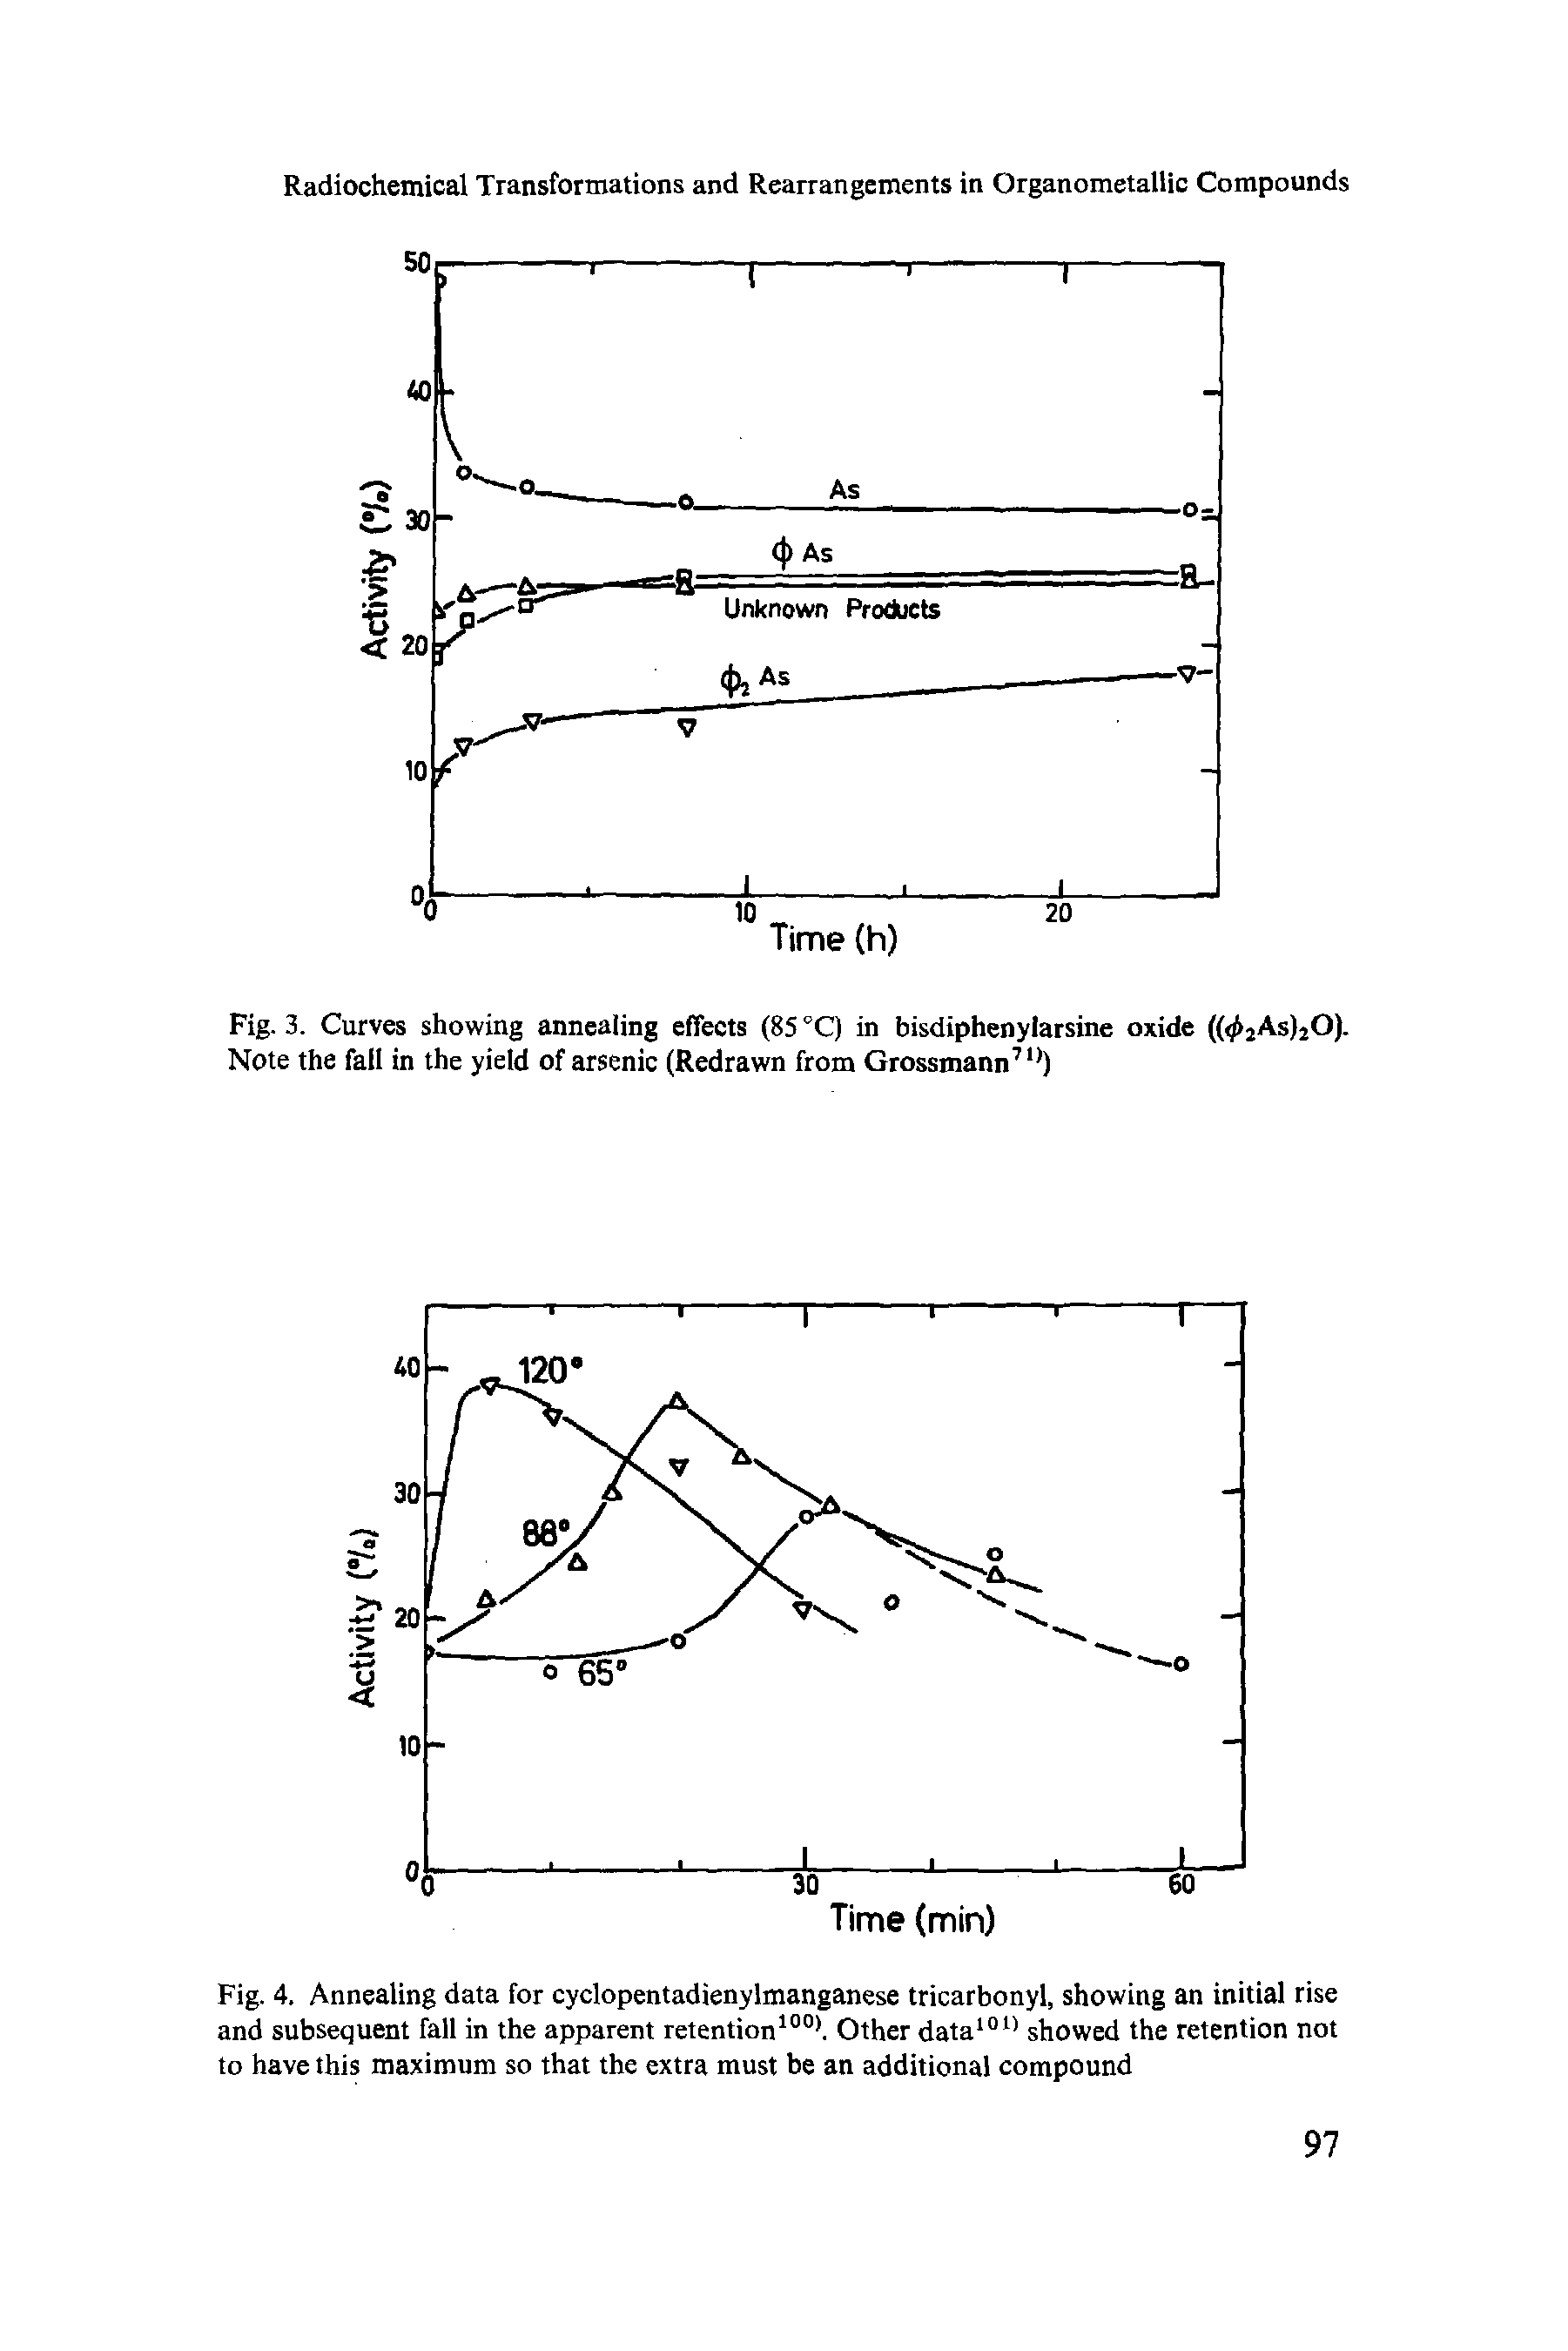 Fig. 4. Annealing data for cyclopentadienylmanganese tricarbonyl, showing an initial rise and subsequent fall in the apparent retention ". Other data "" showed the retention not to have this maximum so that the extra must be an additional compound...